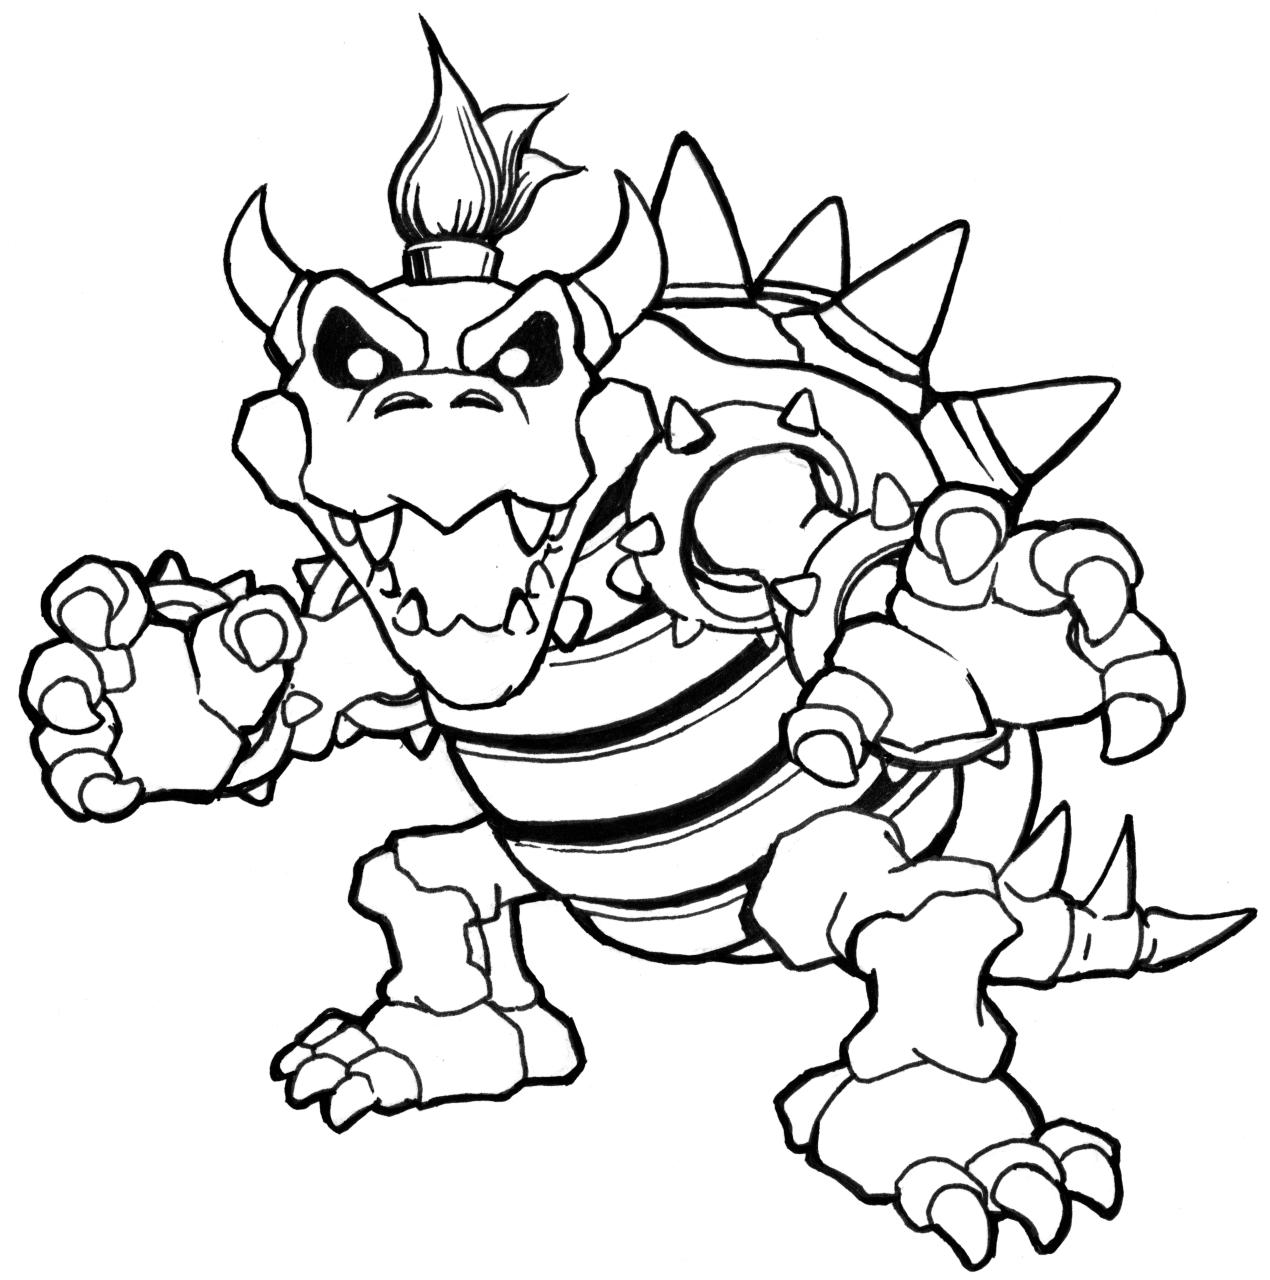 Dry Bowser Coloring Page